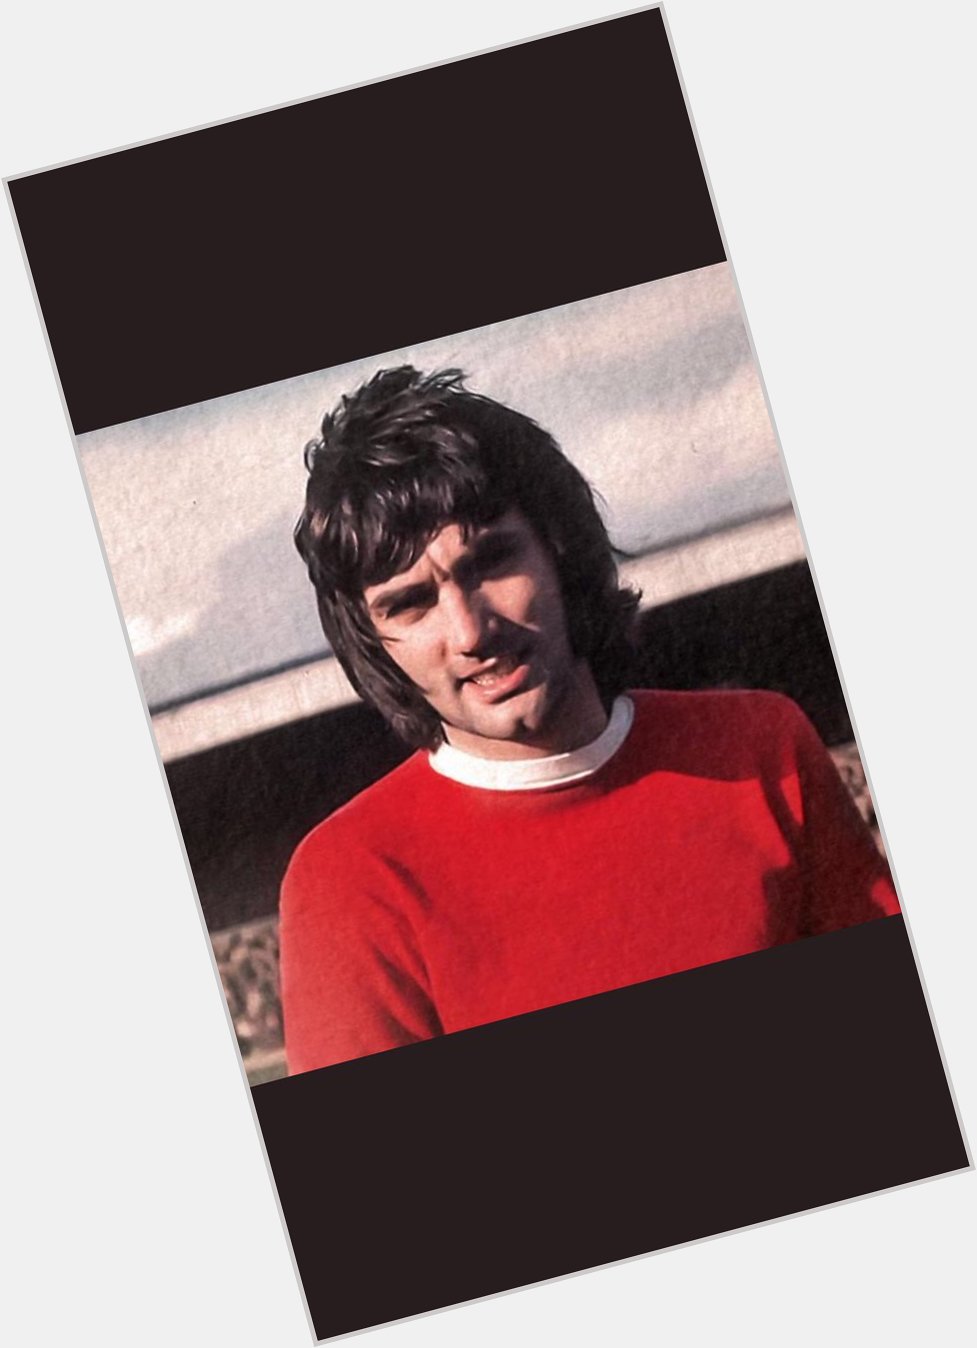 Happy birthday to one of the greatest Utd players in history: George Best 